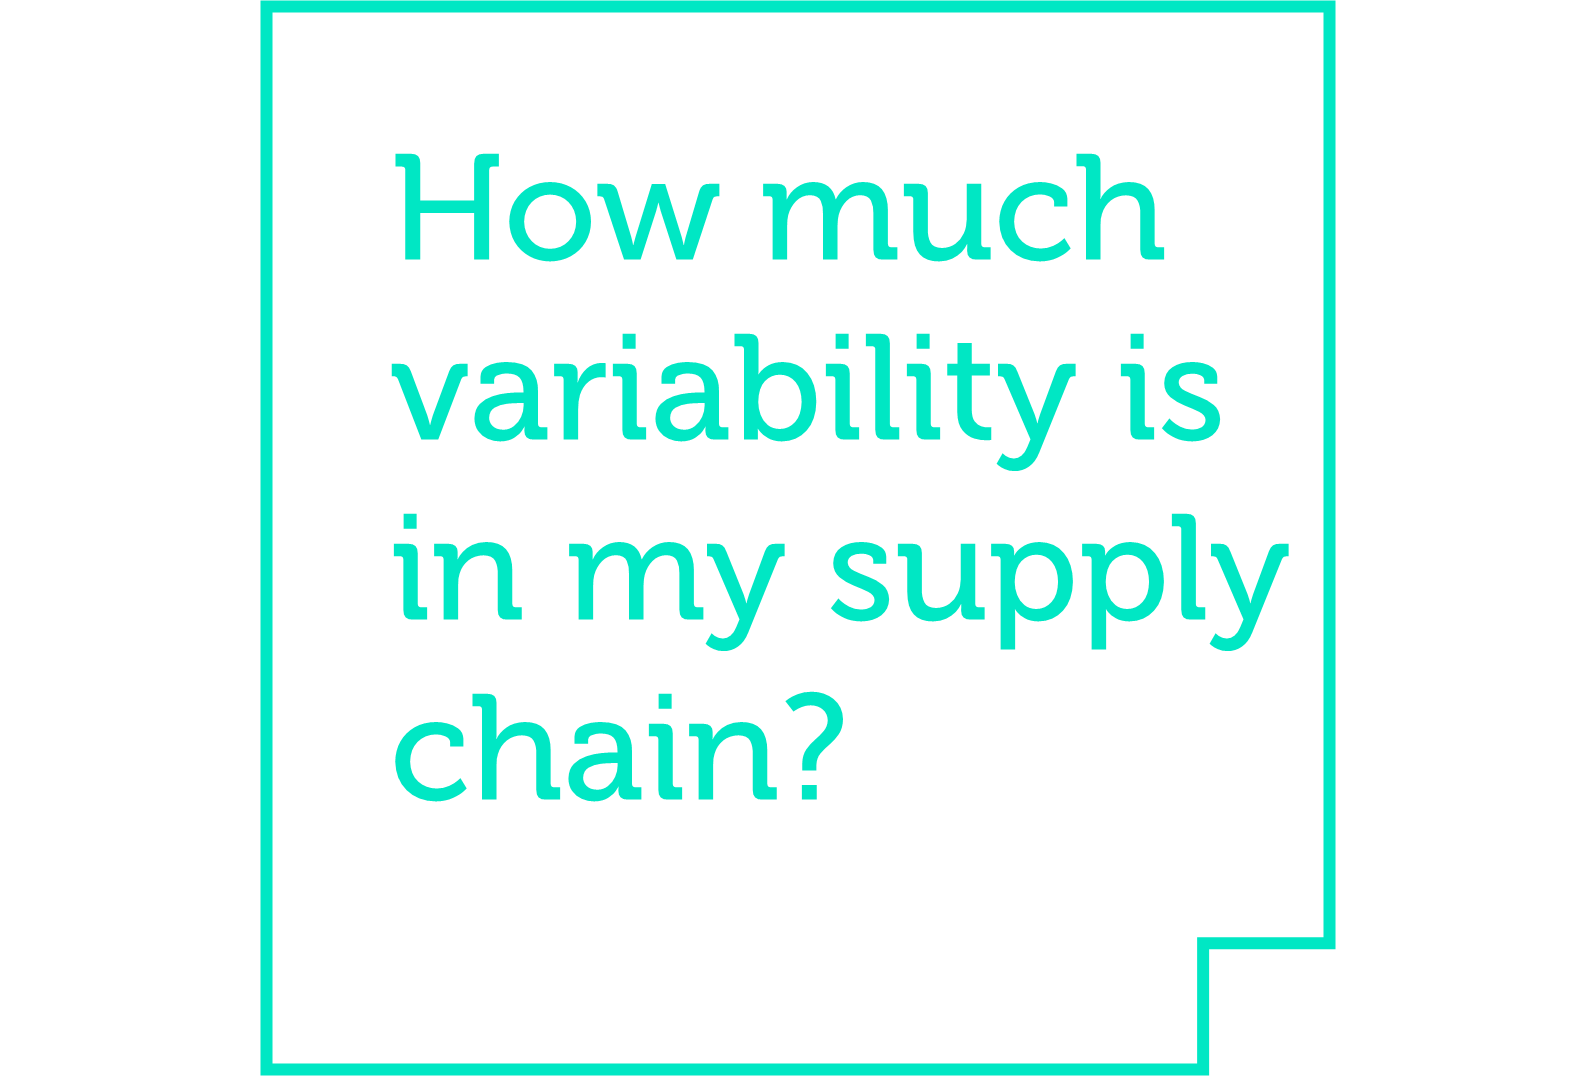 Axon: How much variability is in my supply chain?